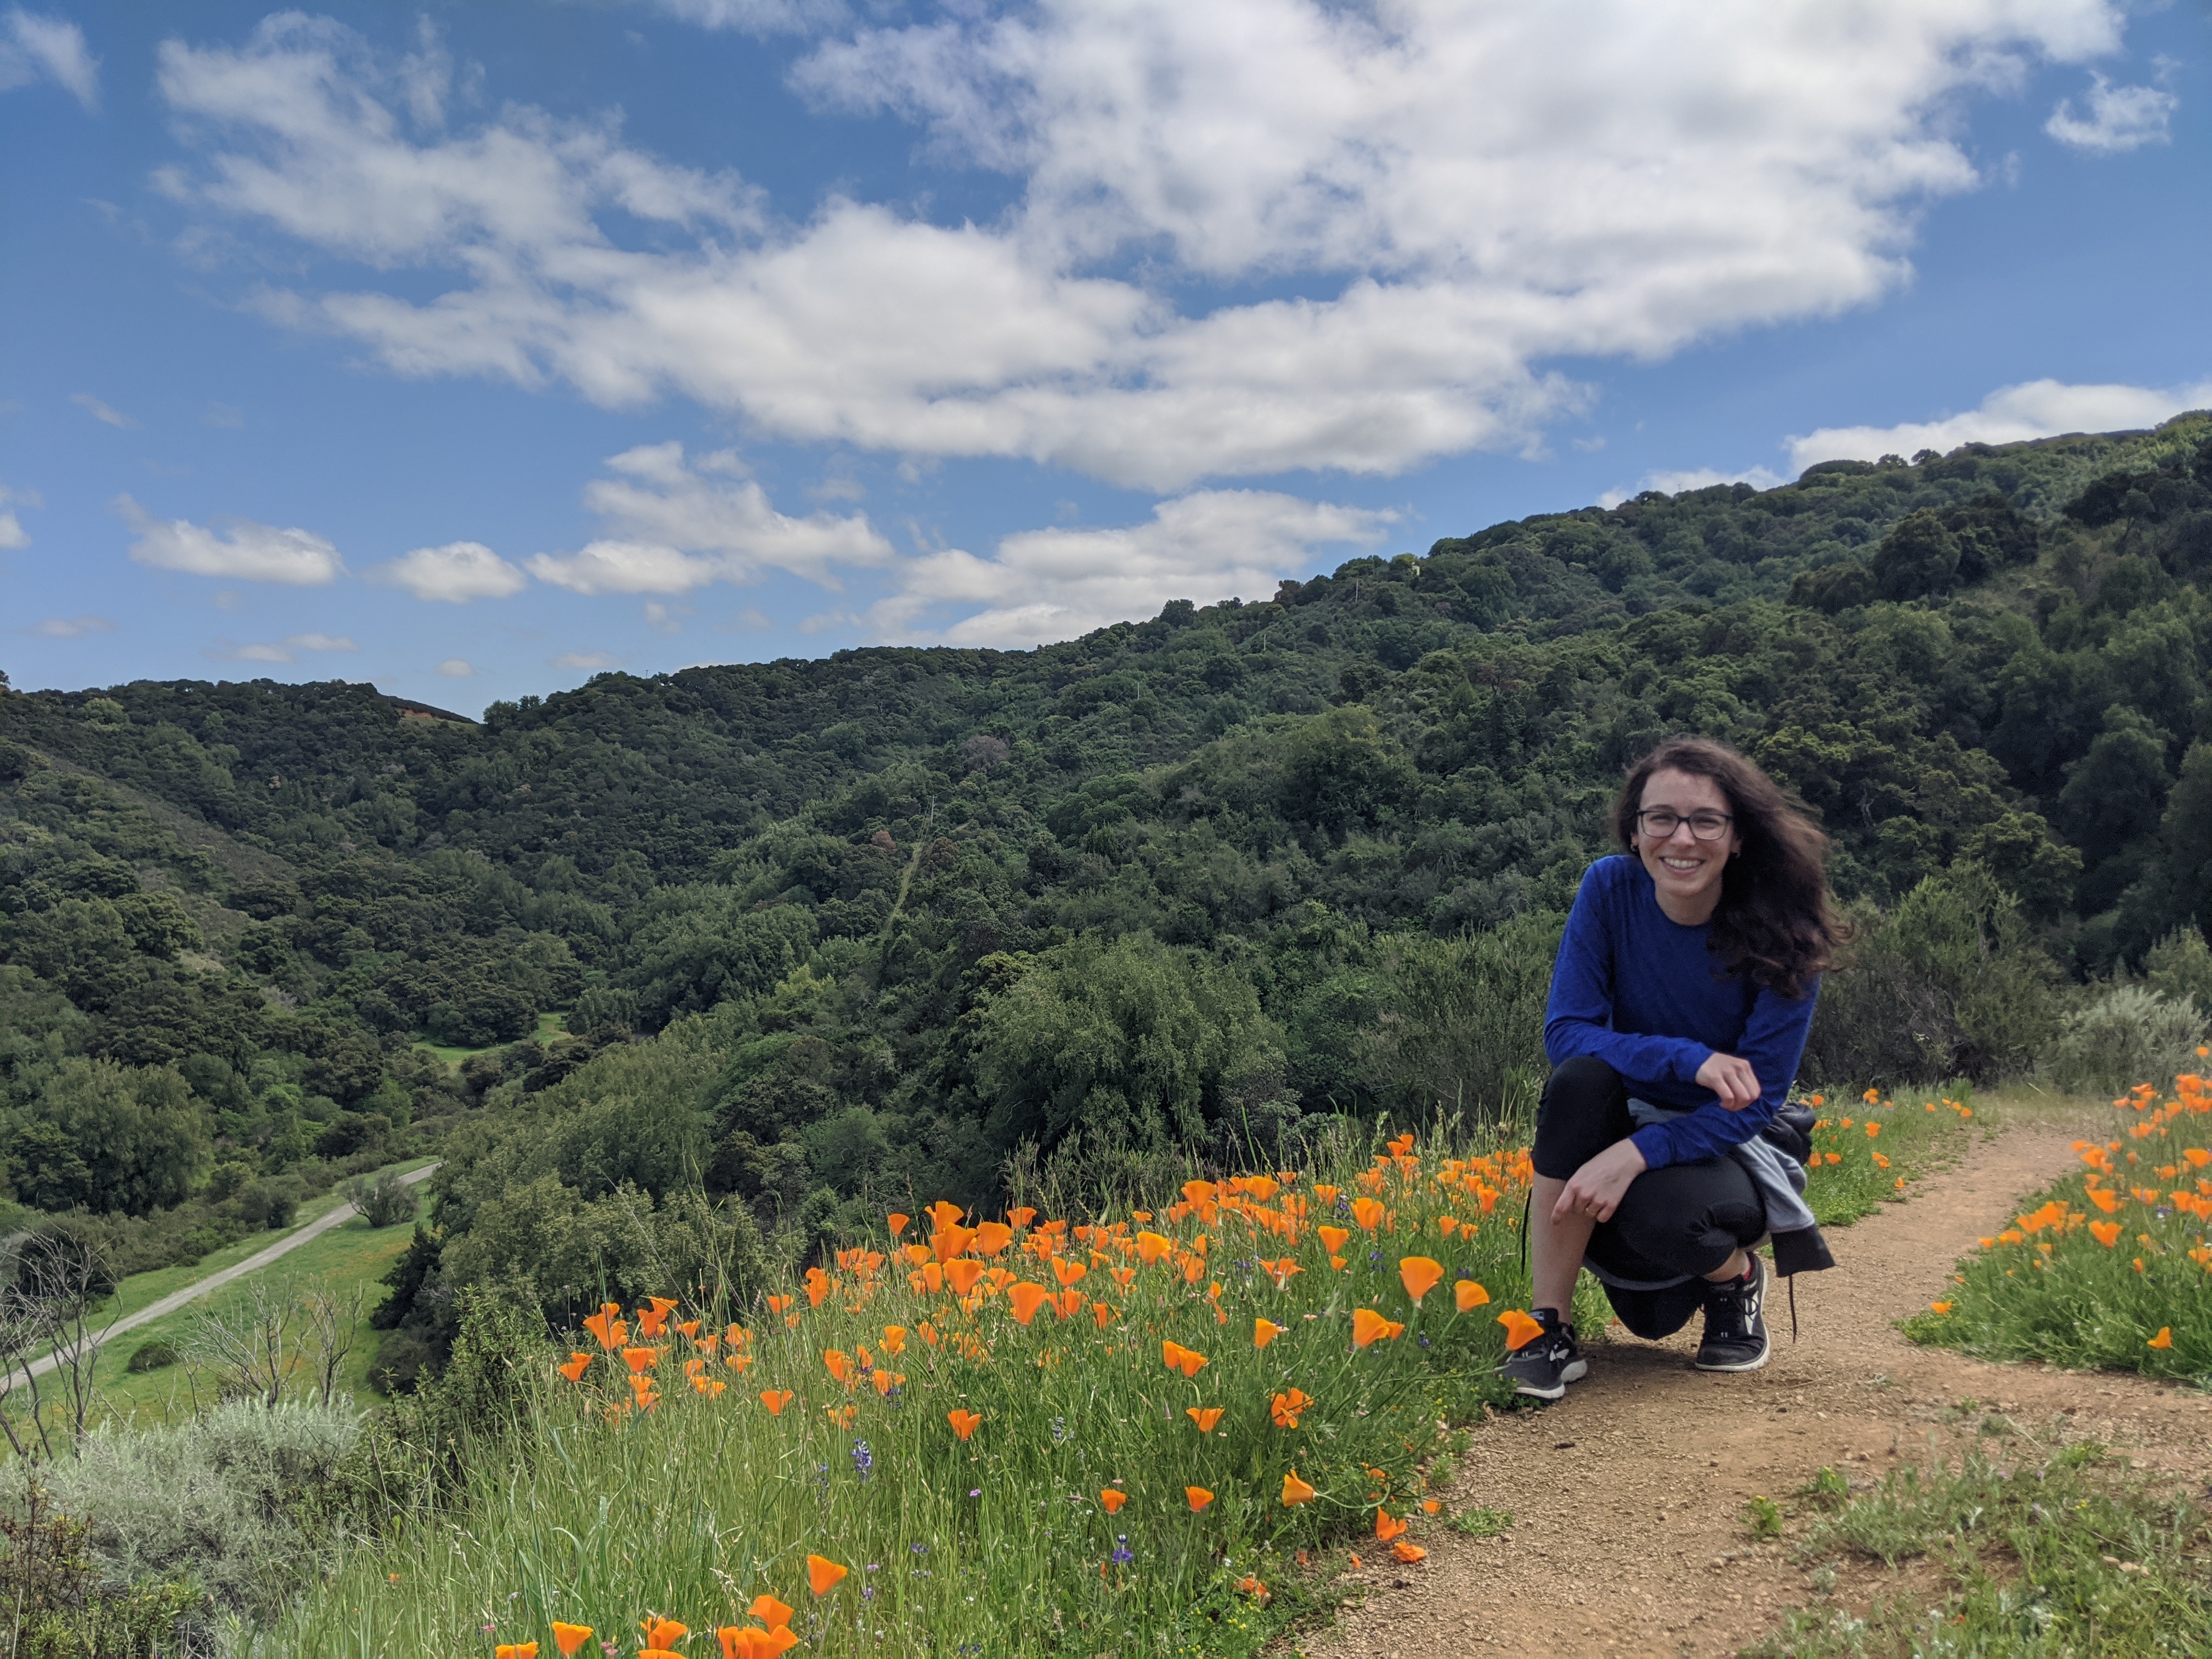 Julie with California poppies